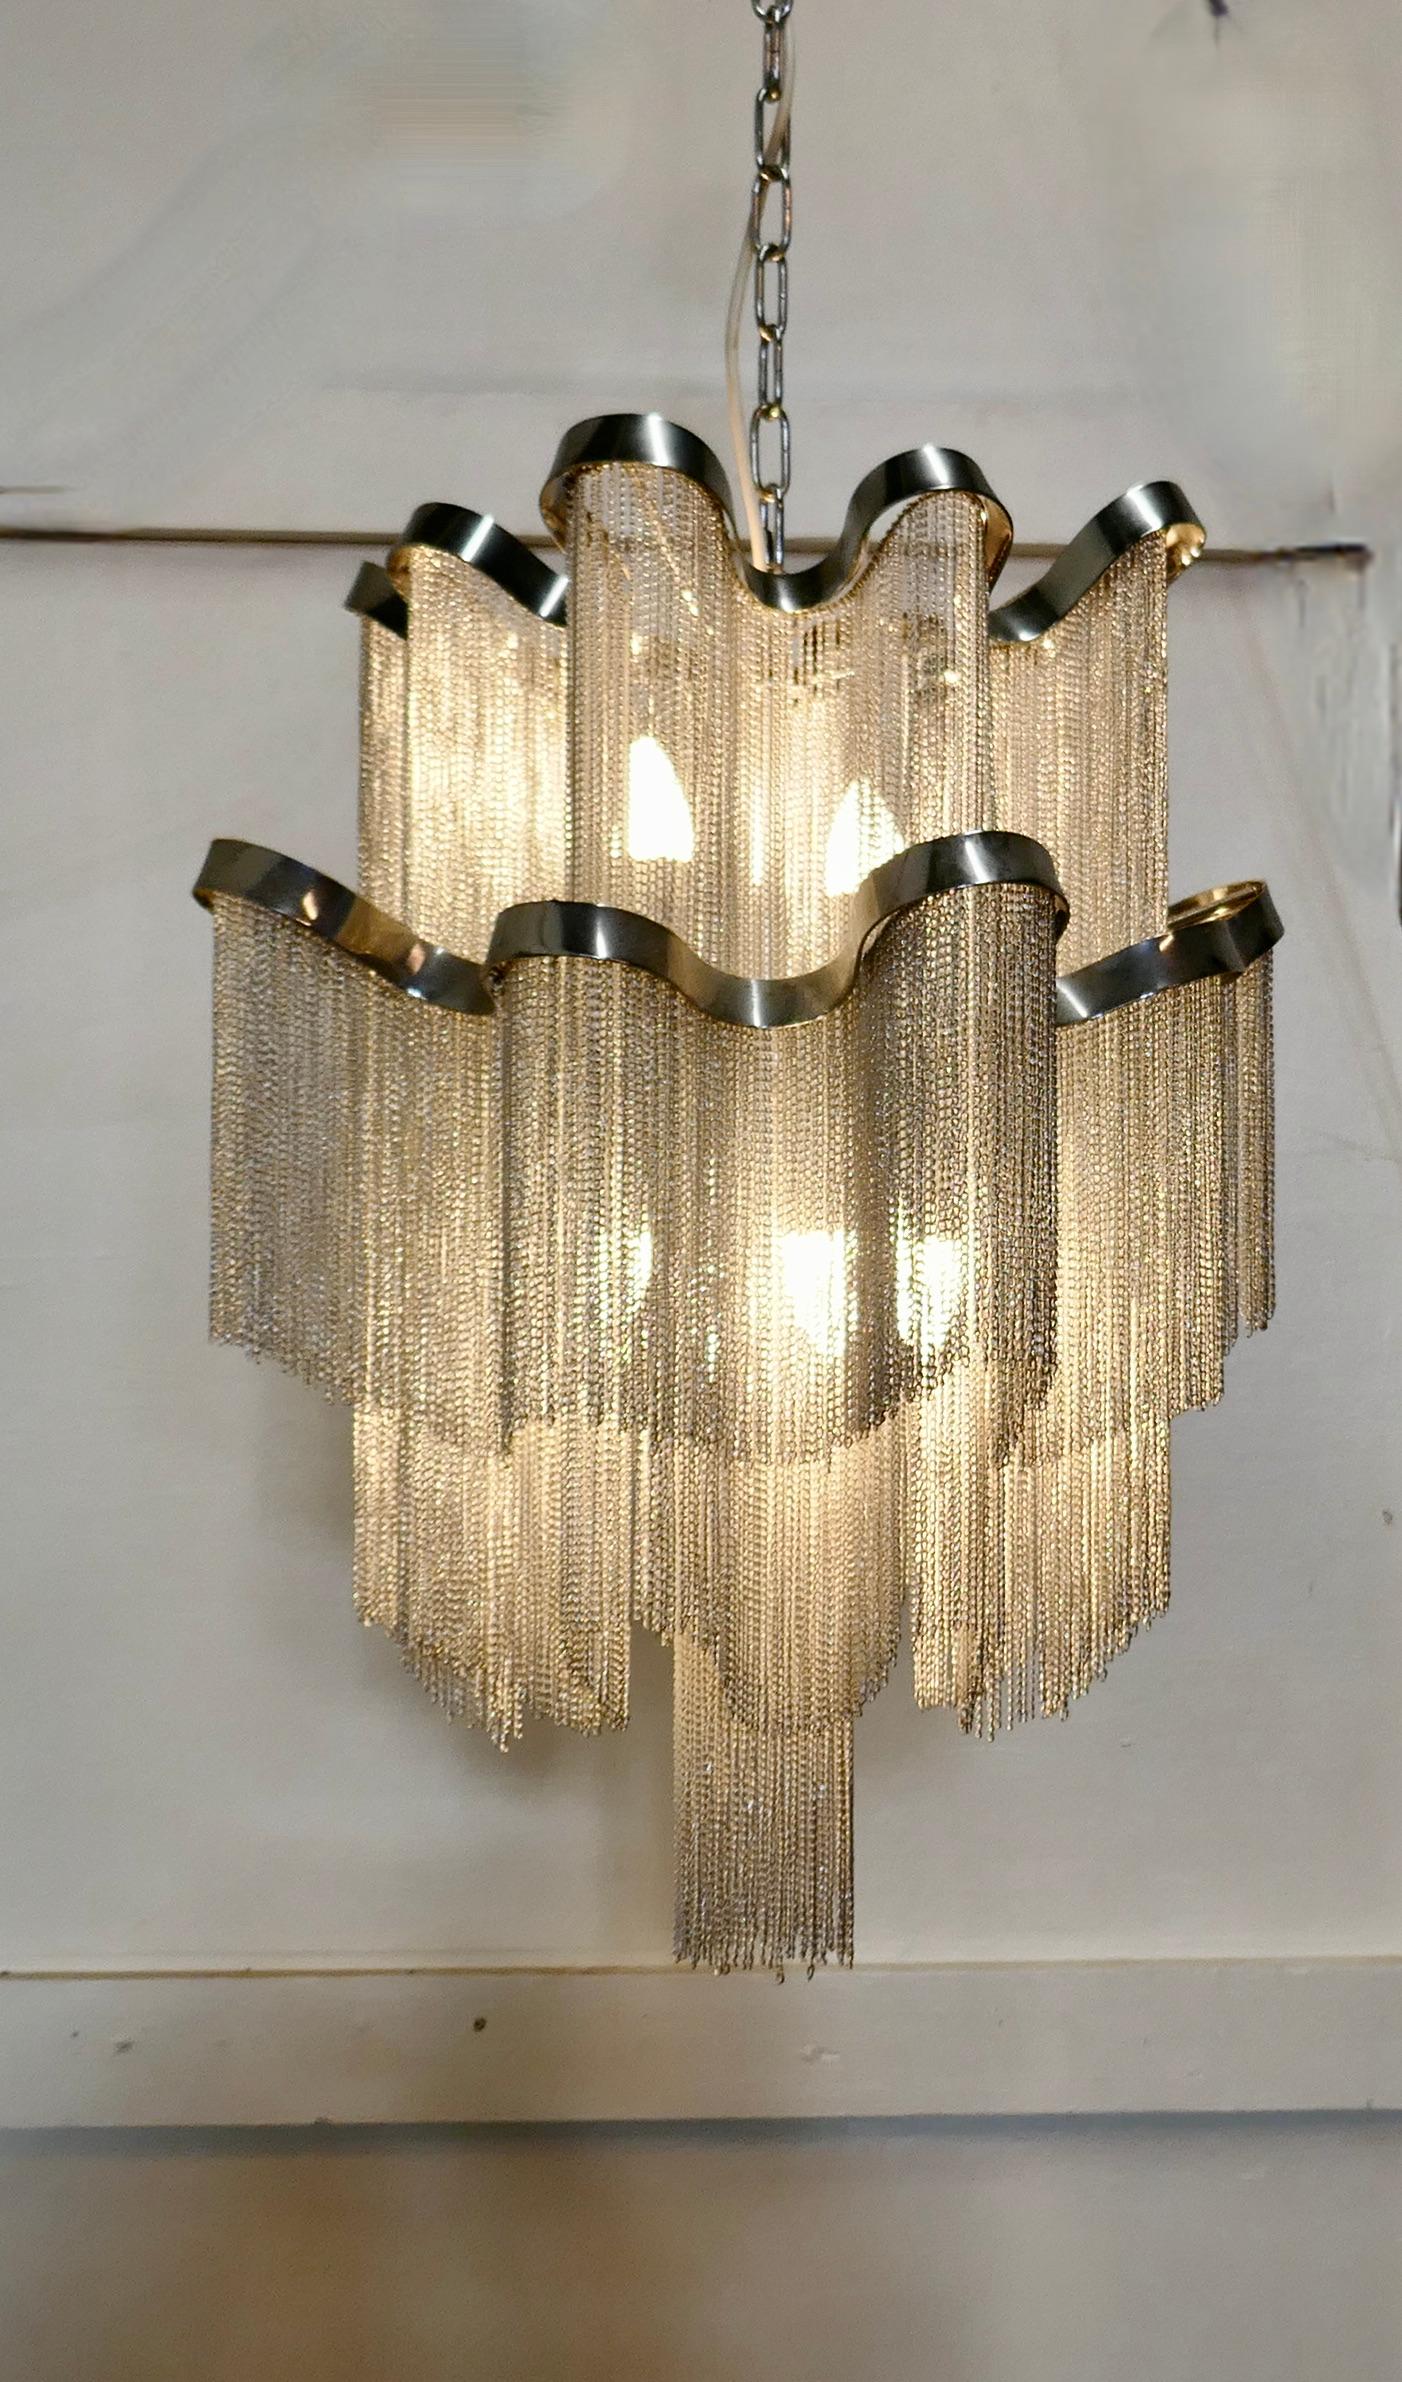 Large midcentury wavy waterfall chrome chain chandelier

This is a very unusual design the wavy waterfall tiers are hung with fine chrome chains
Inside the pendant takes 6 bulbs giving a very pleasant bright light
All in good working